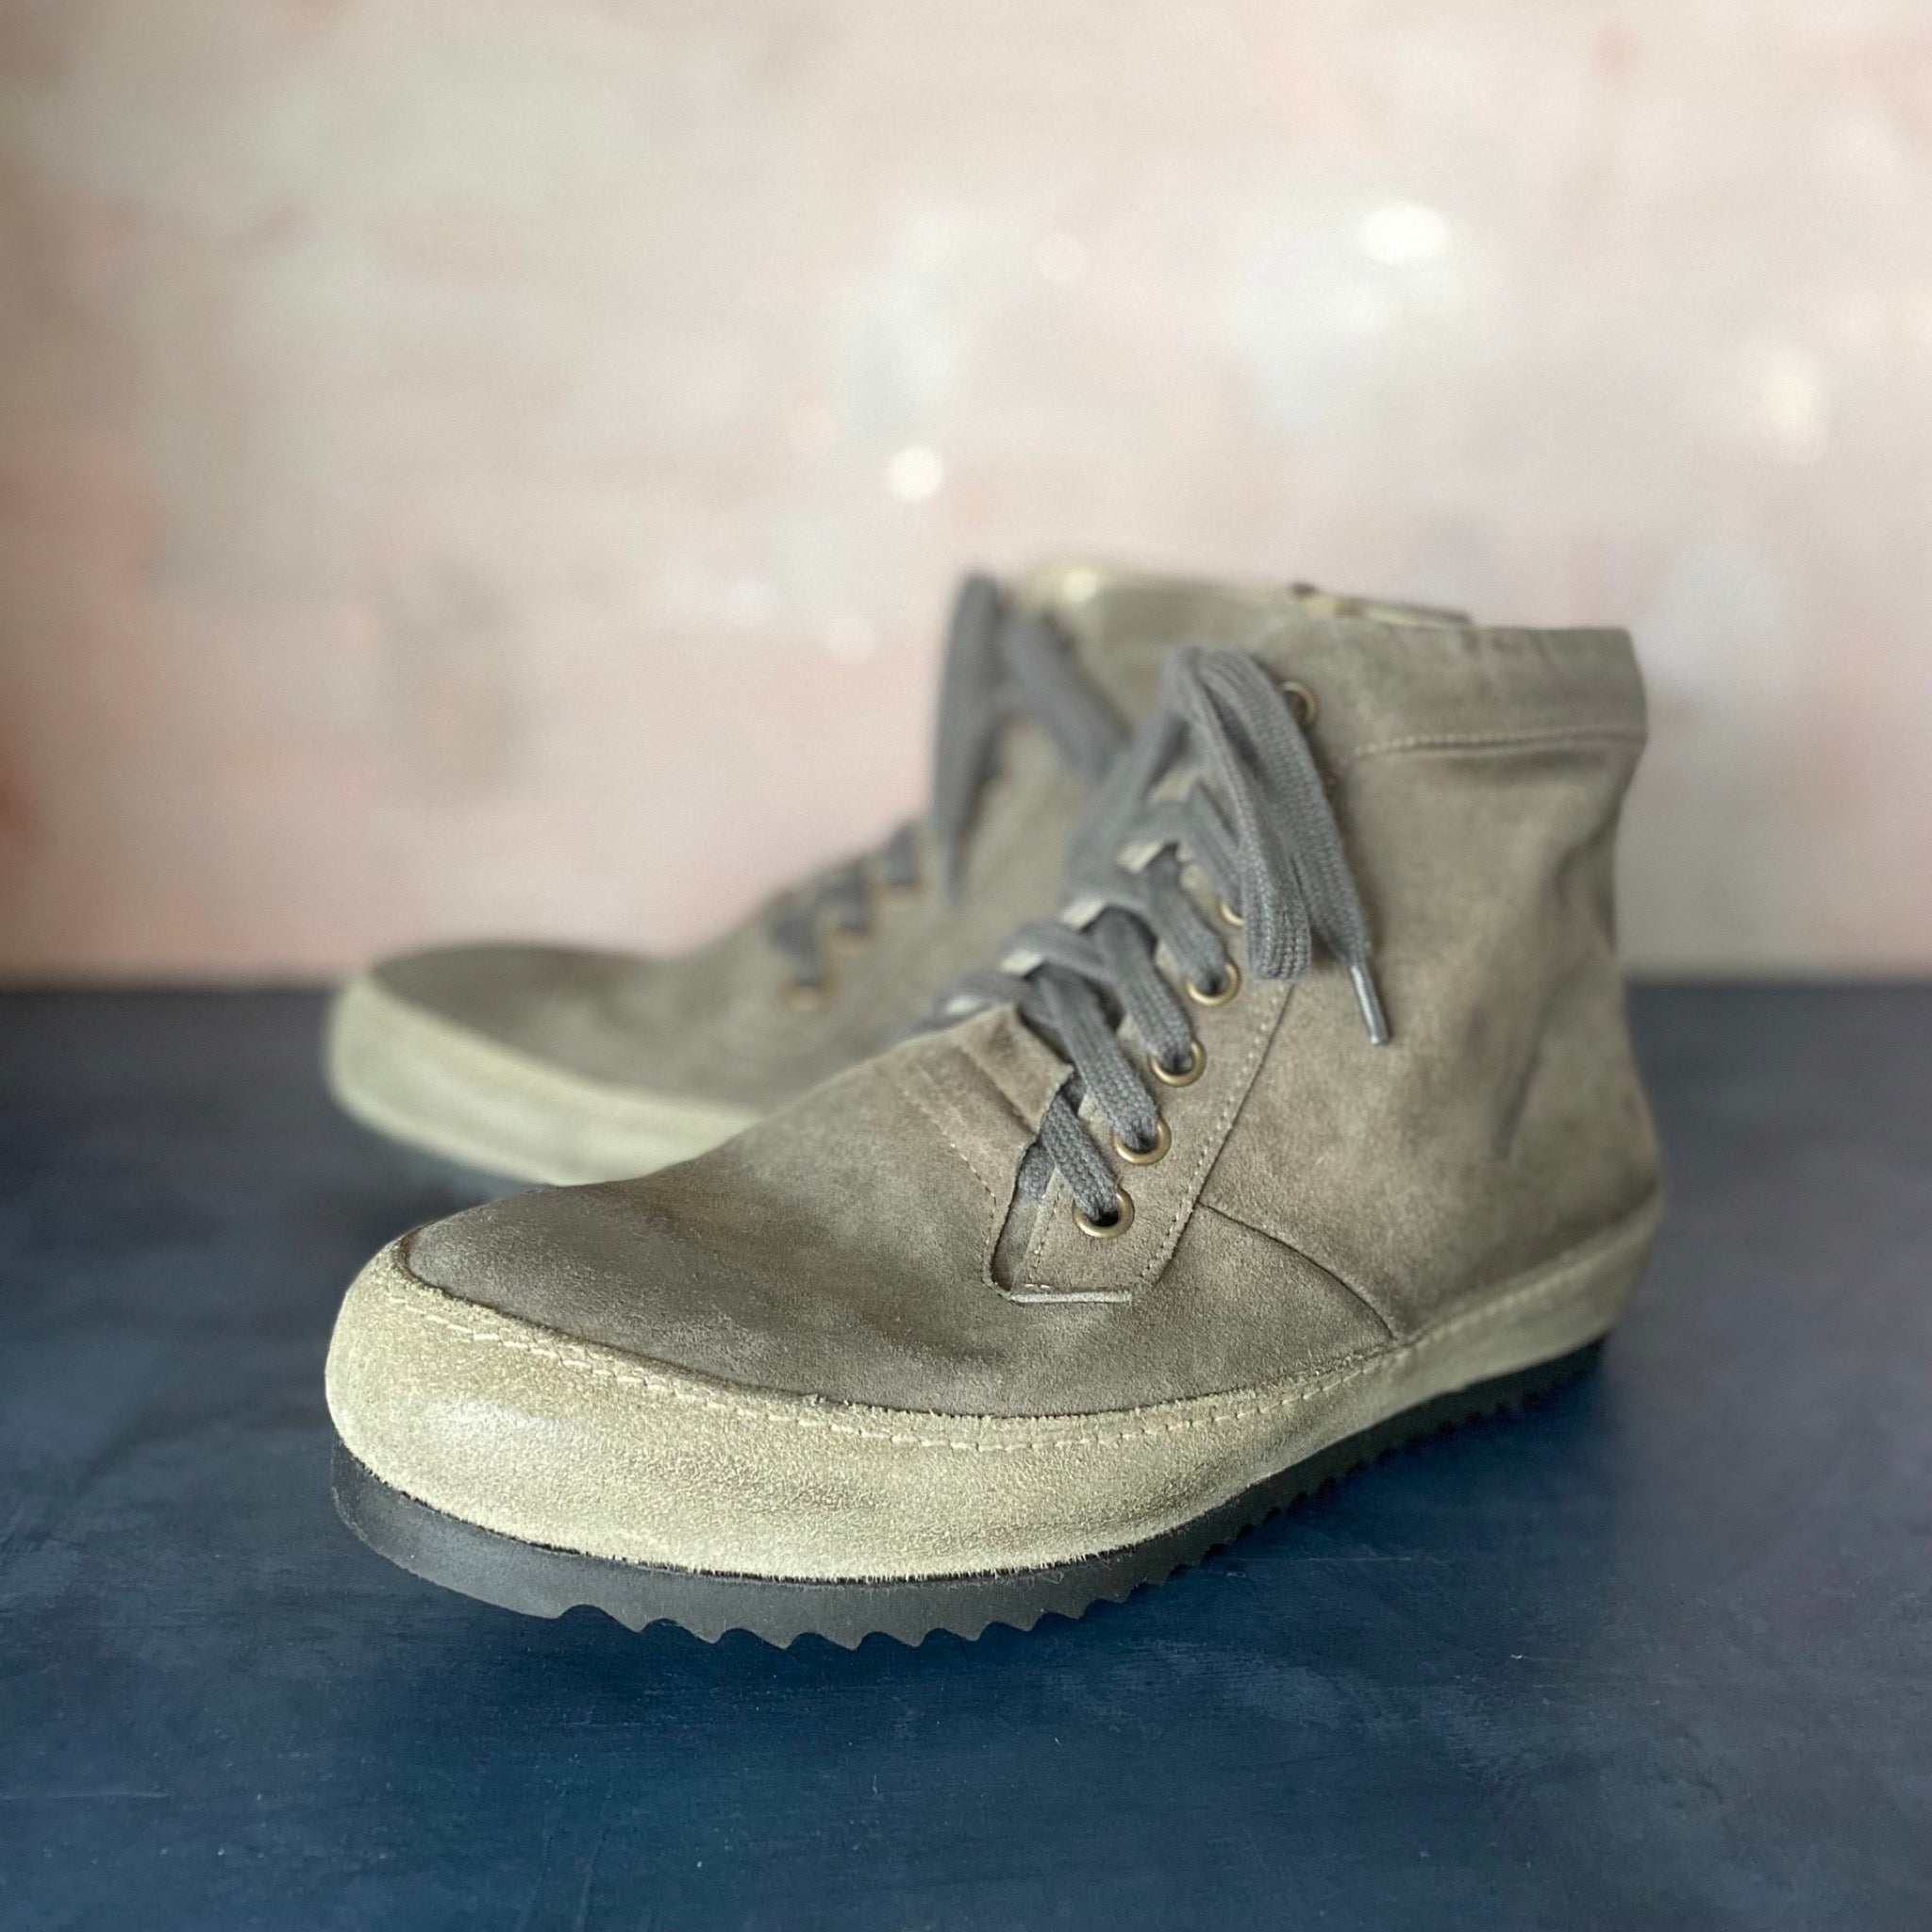 Victoria Varrasso Sportiva Two Tone Washed Oyster Suede Hightops